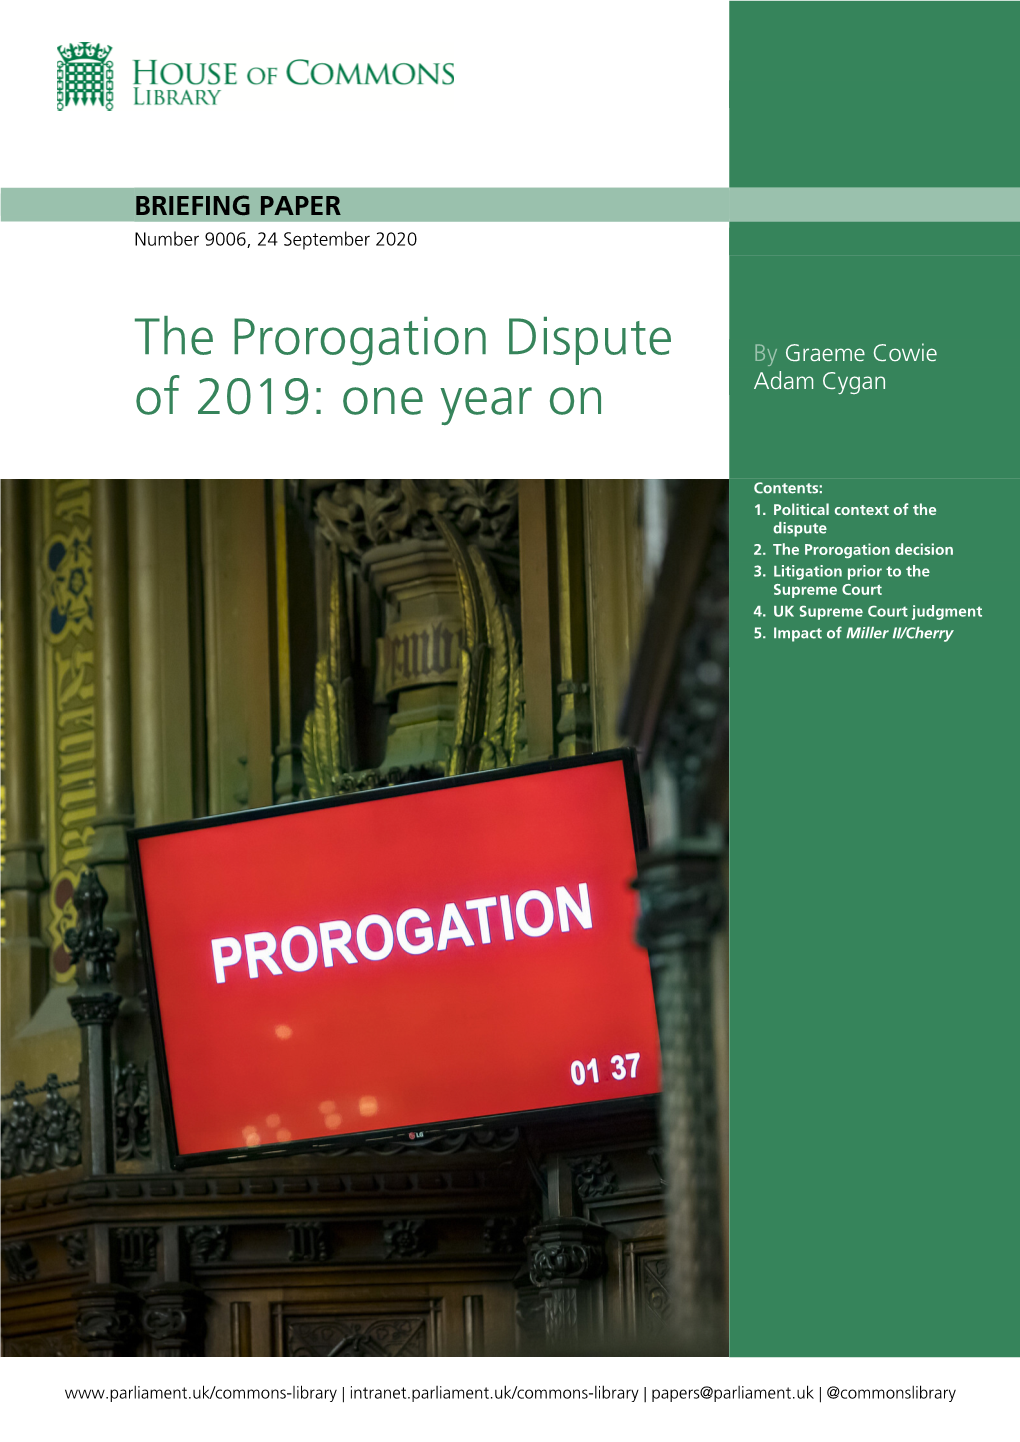 The Prorogation Dispute of 2019: One Year On